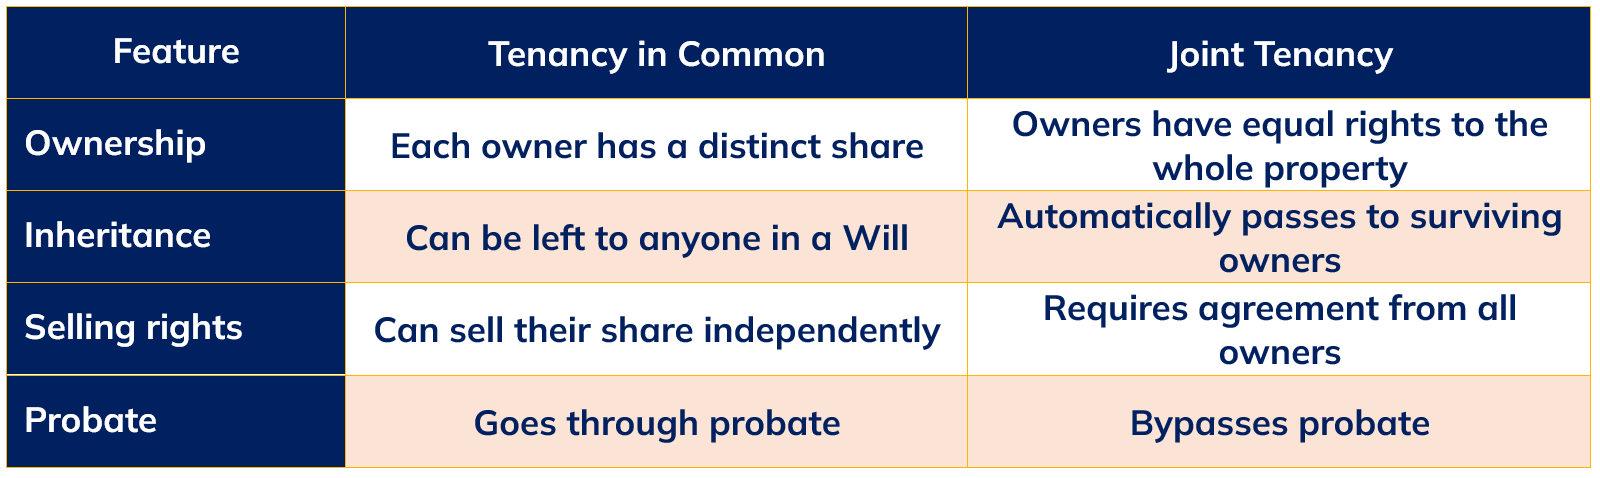 Table Comparing Joint Tenancy and Tenancy in Common